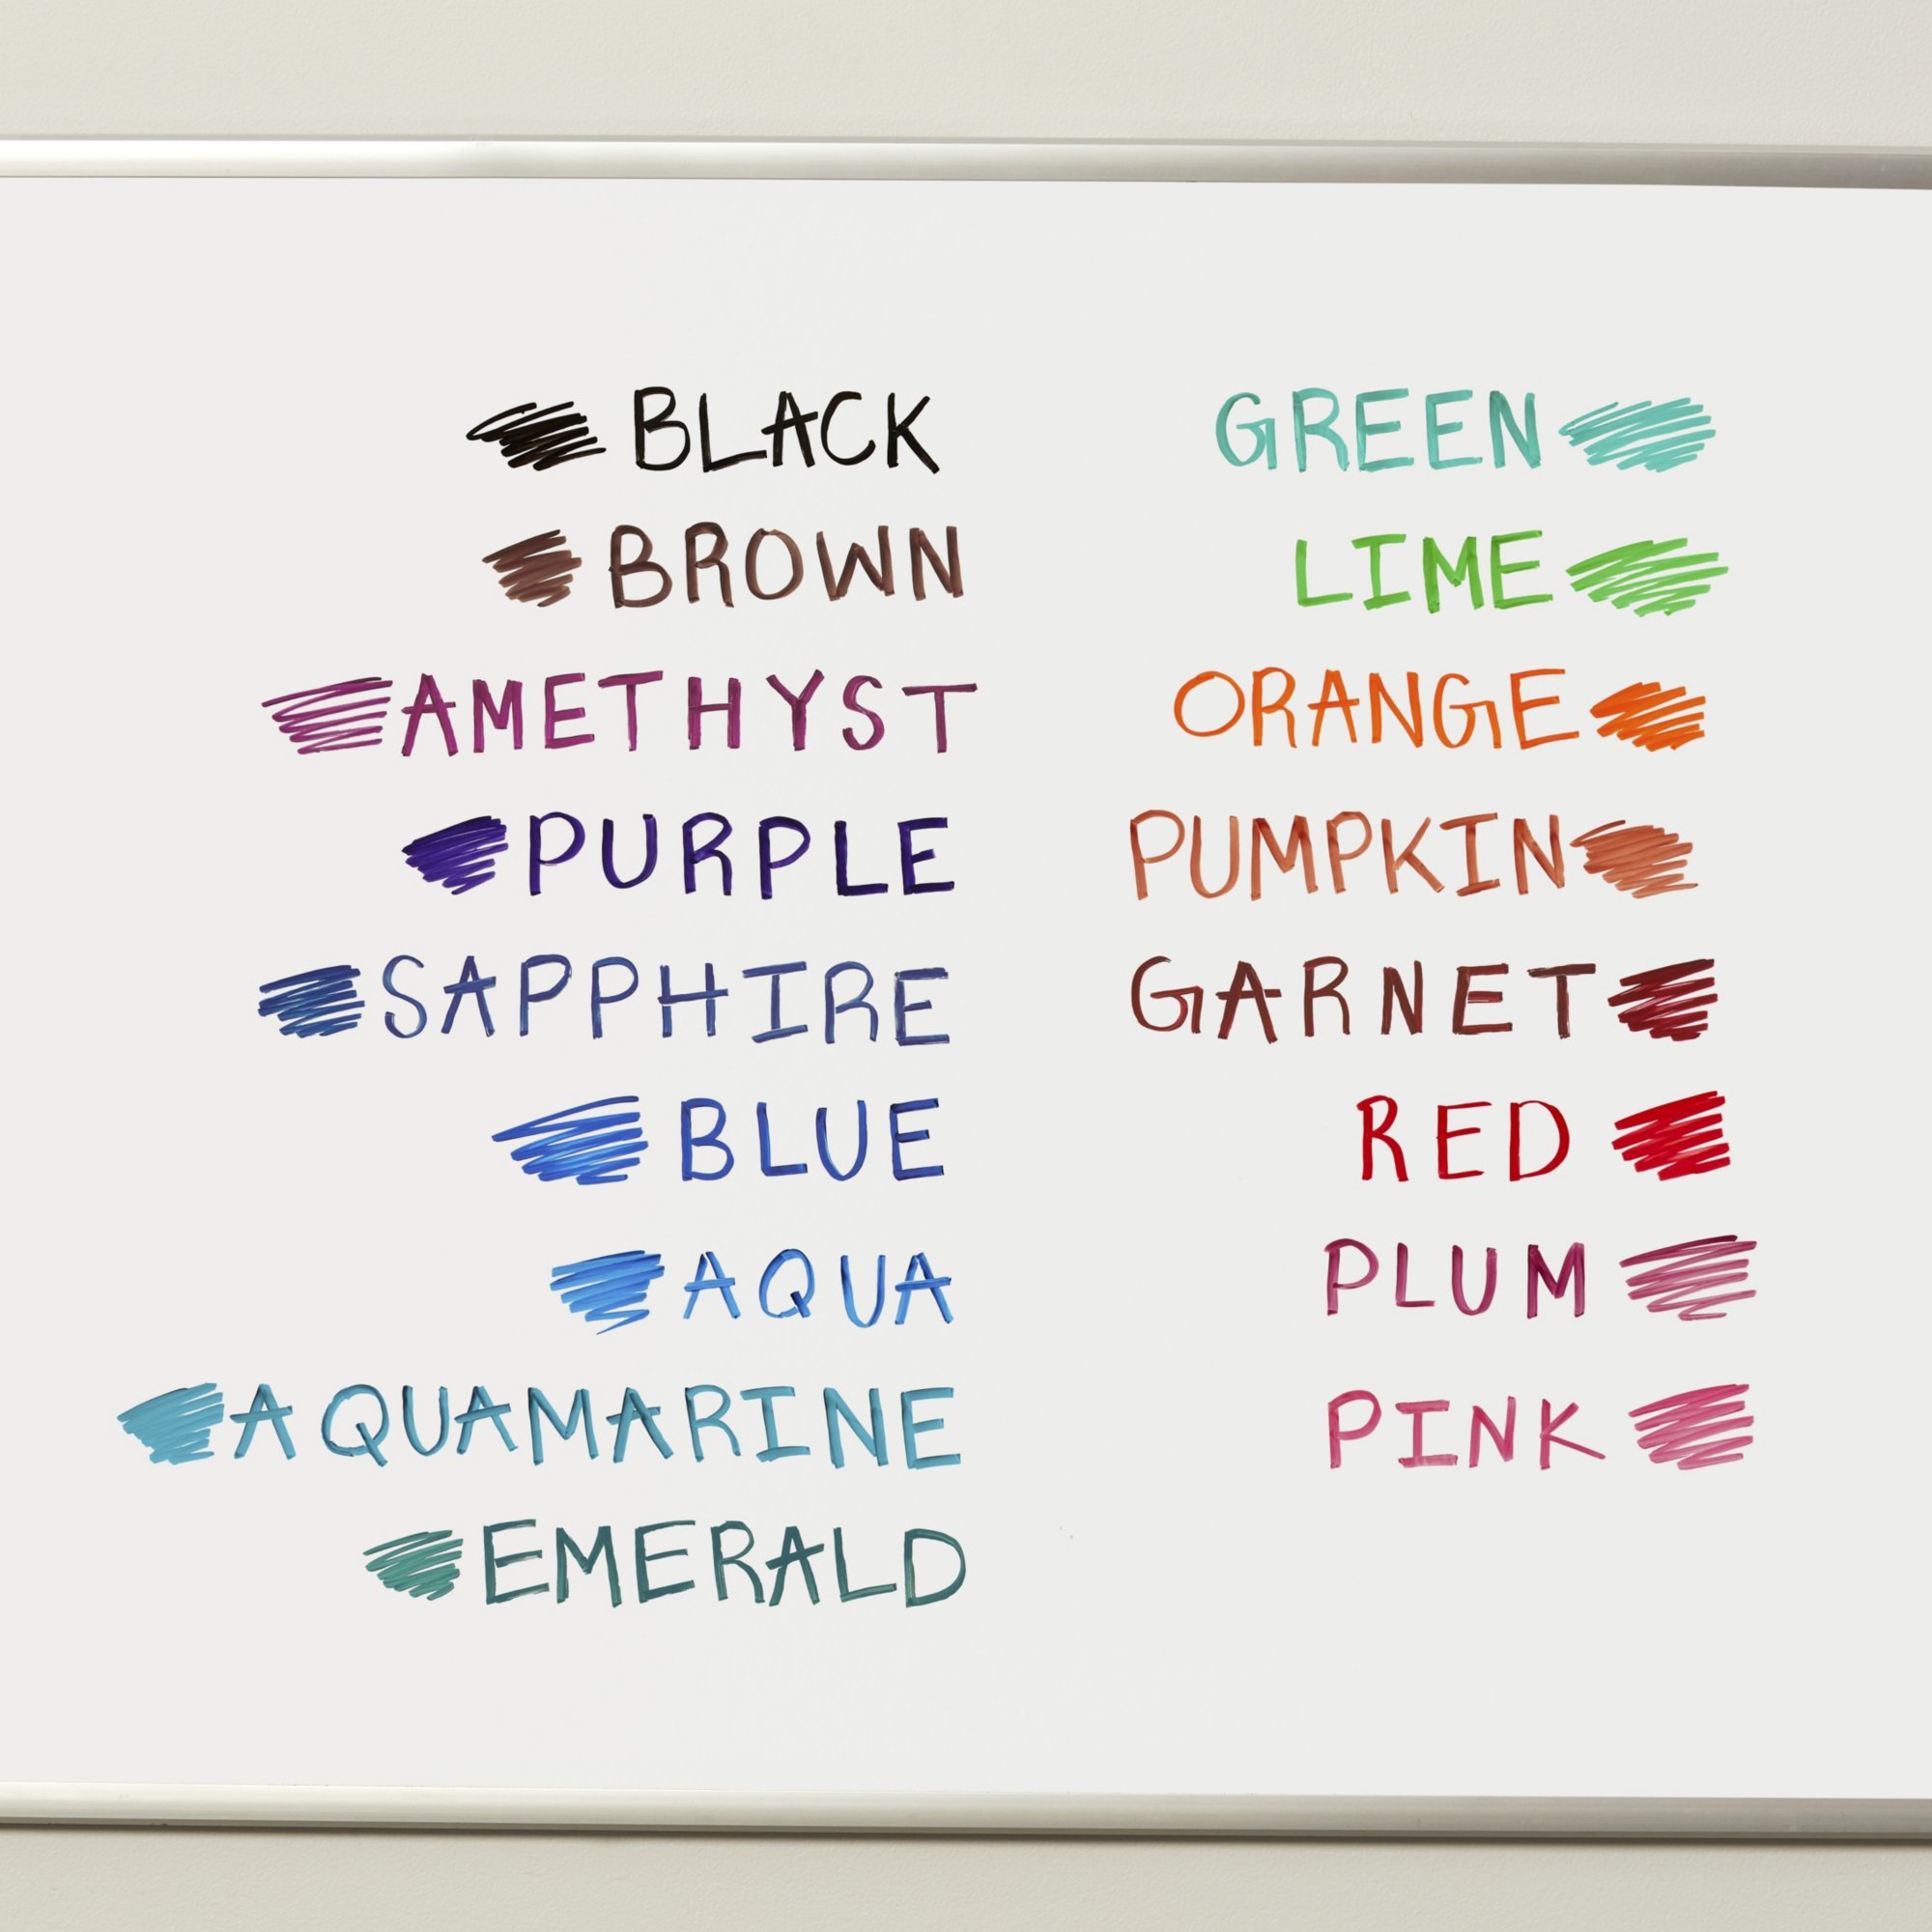 Expo® Low Odor Fine Tip Dry Erase Markers - Assorted Colors, 1 ct